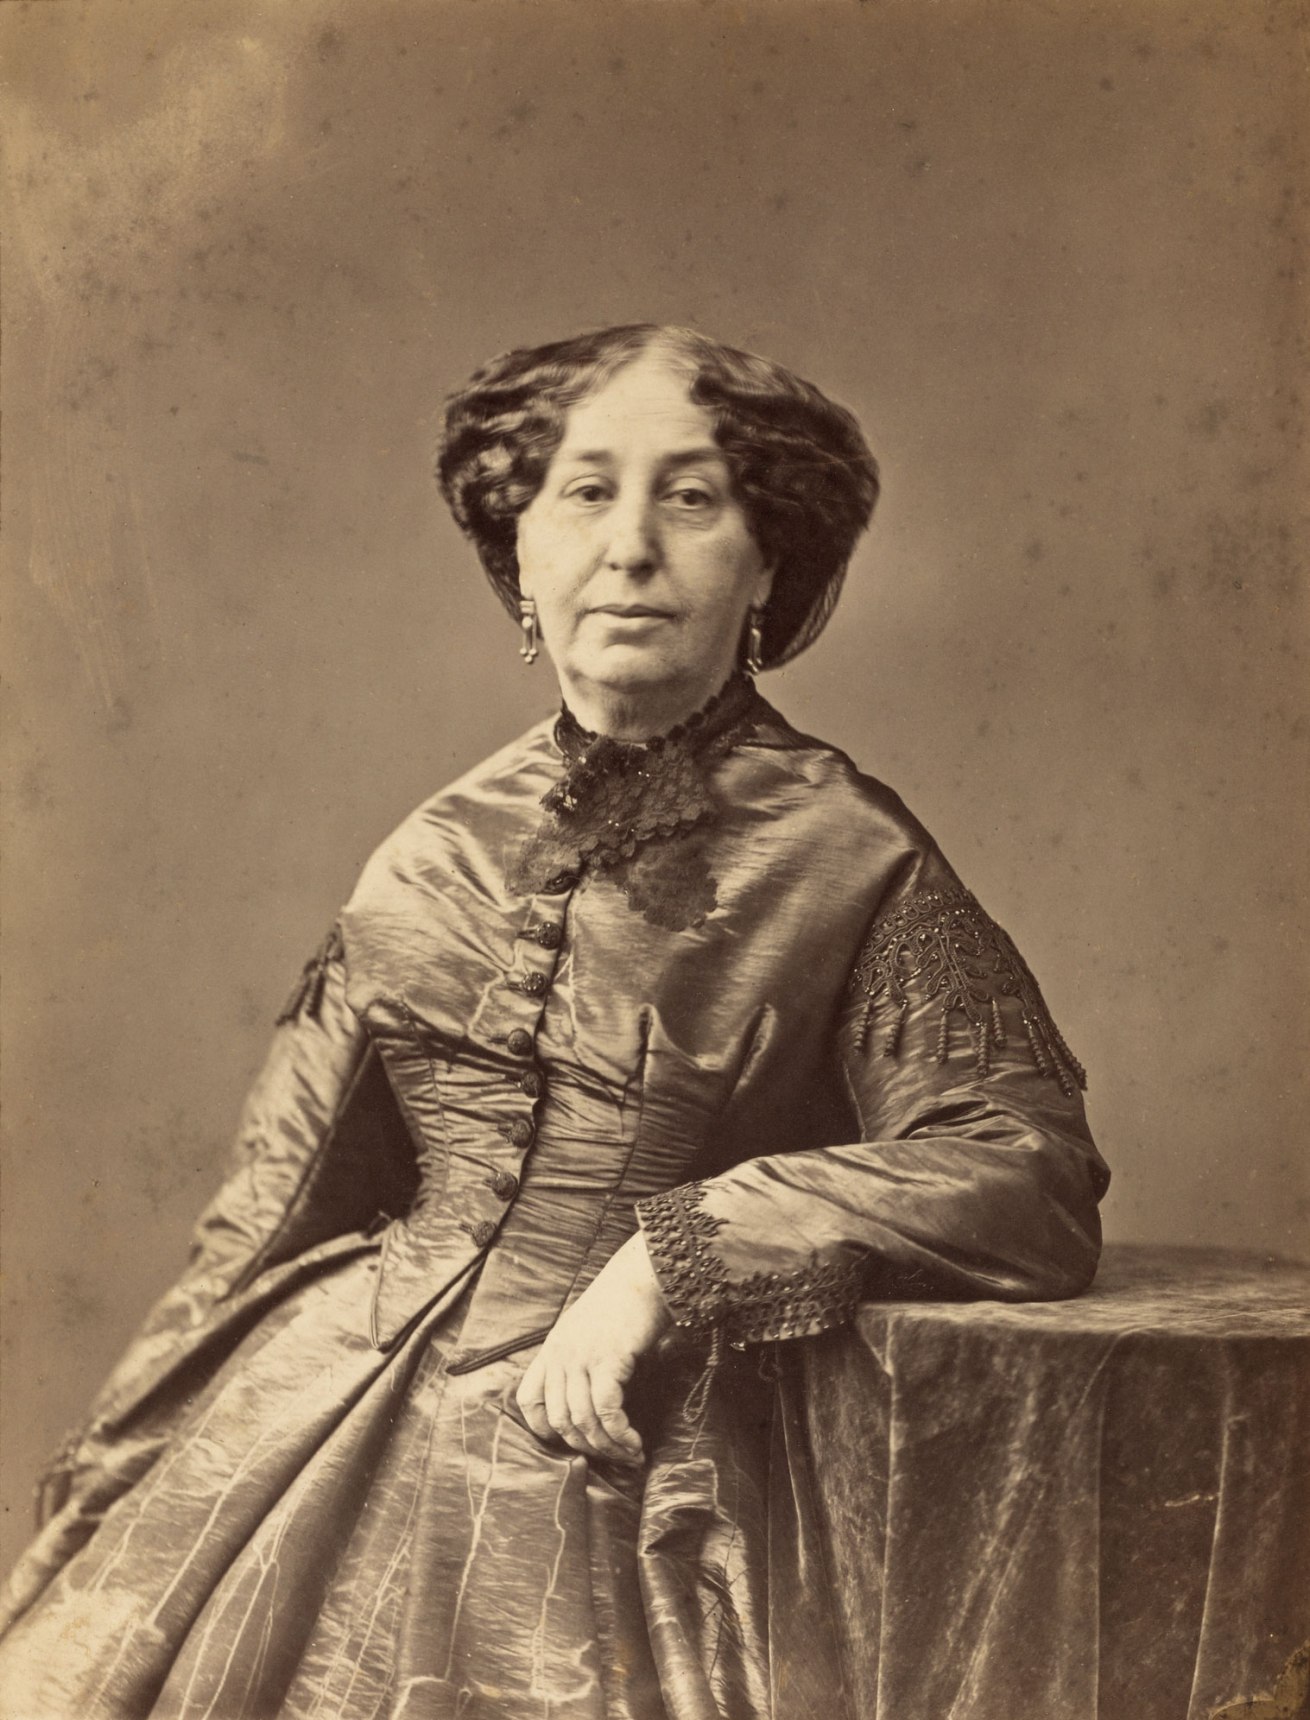 Fotó: Nadar [Gaspard Félix Tournachon] (French, 1820-1910)<br />George Sand (Amandine-Aurore-Lucile Dupin), Writer<br />c. 1865<br />Albumen silver print from a glass negative<br />Image: 24.1 x 18.3 cm (9 1/2 x 7 1/4 in.)<br />The J. Paul Getty Museum, Los Angeles